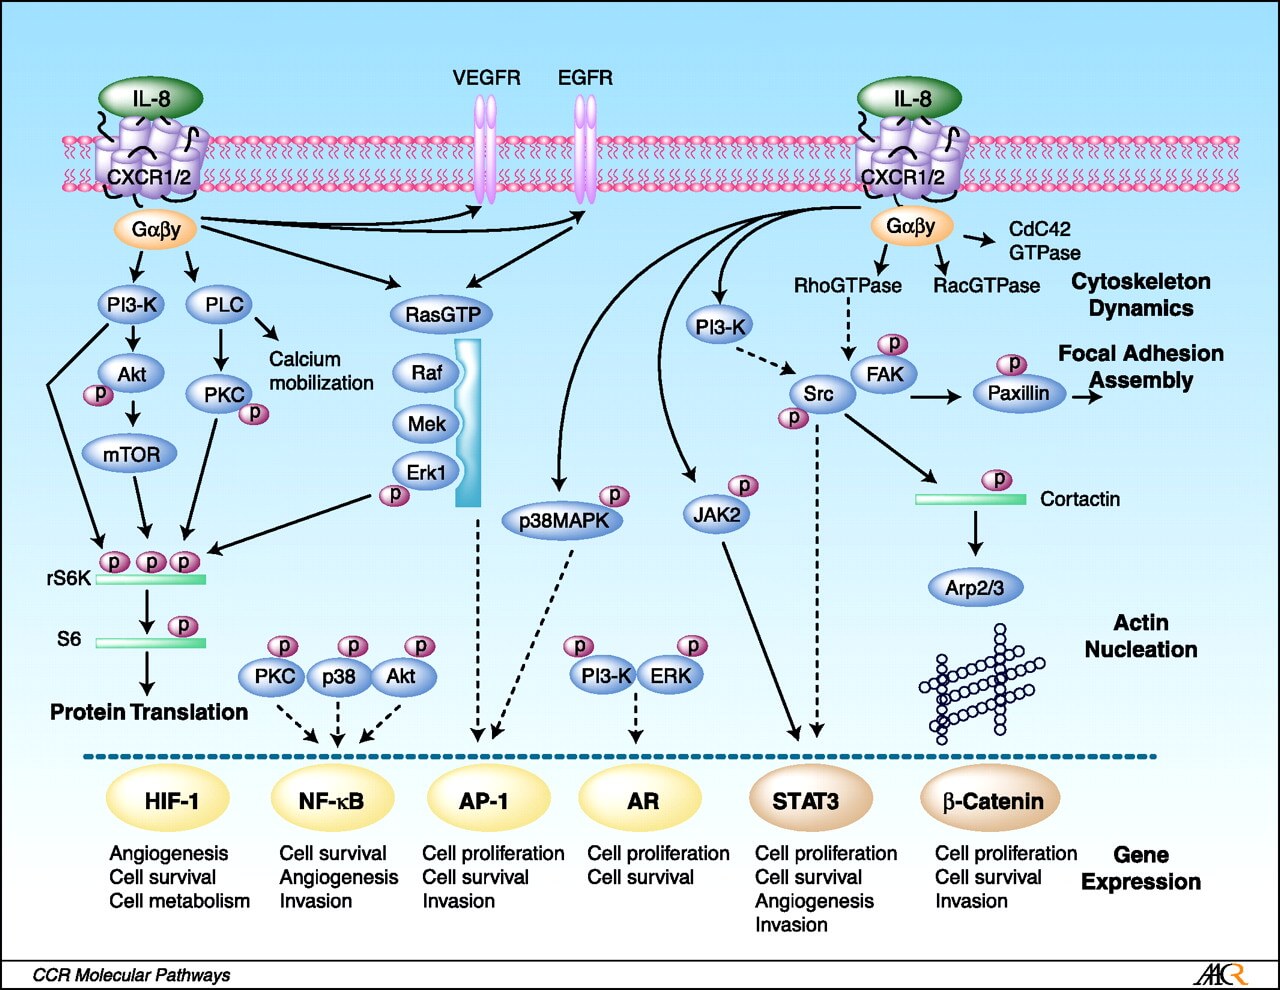 Characterized IL-8 signaling pathways.